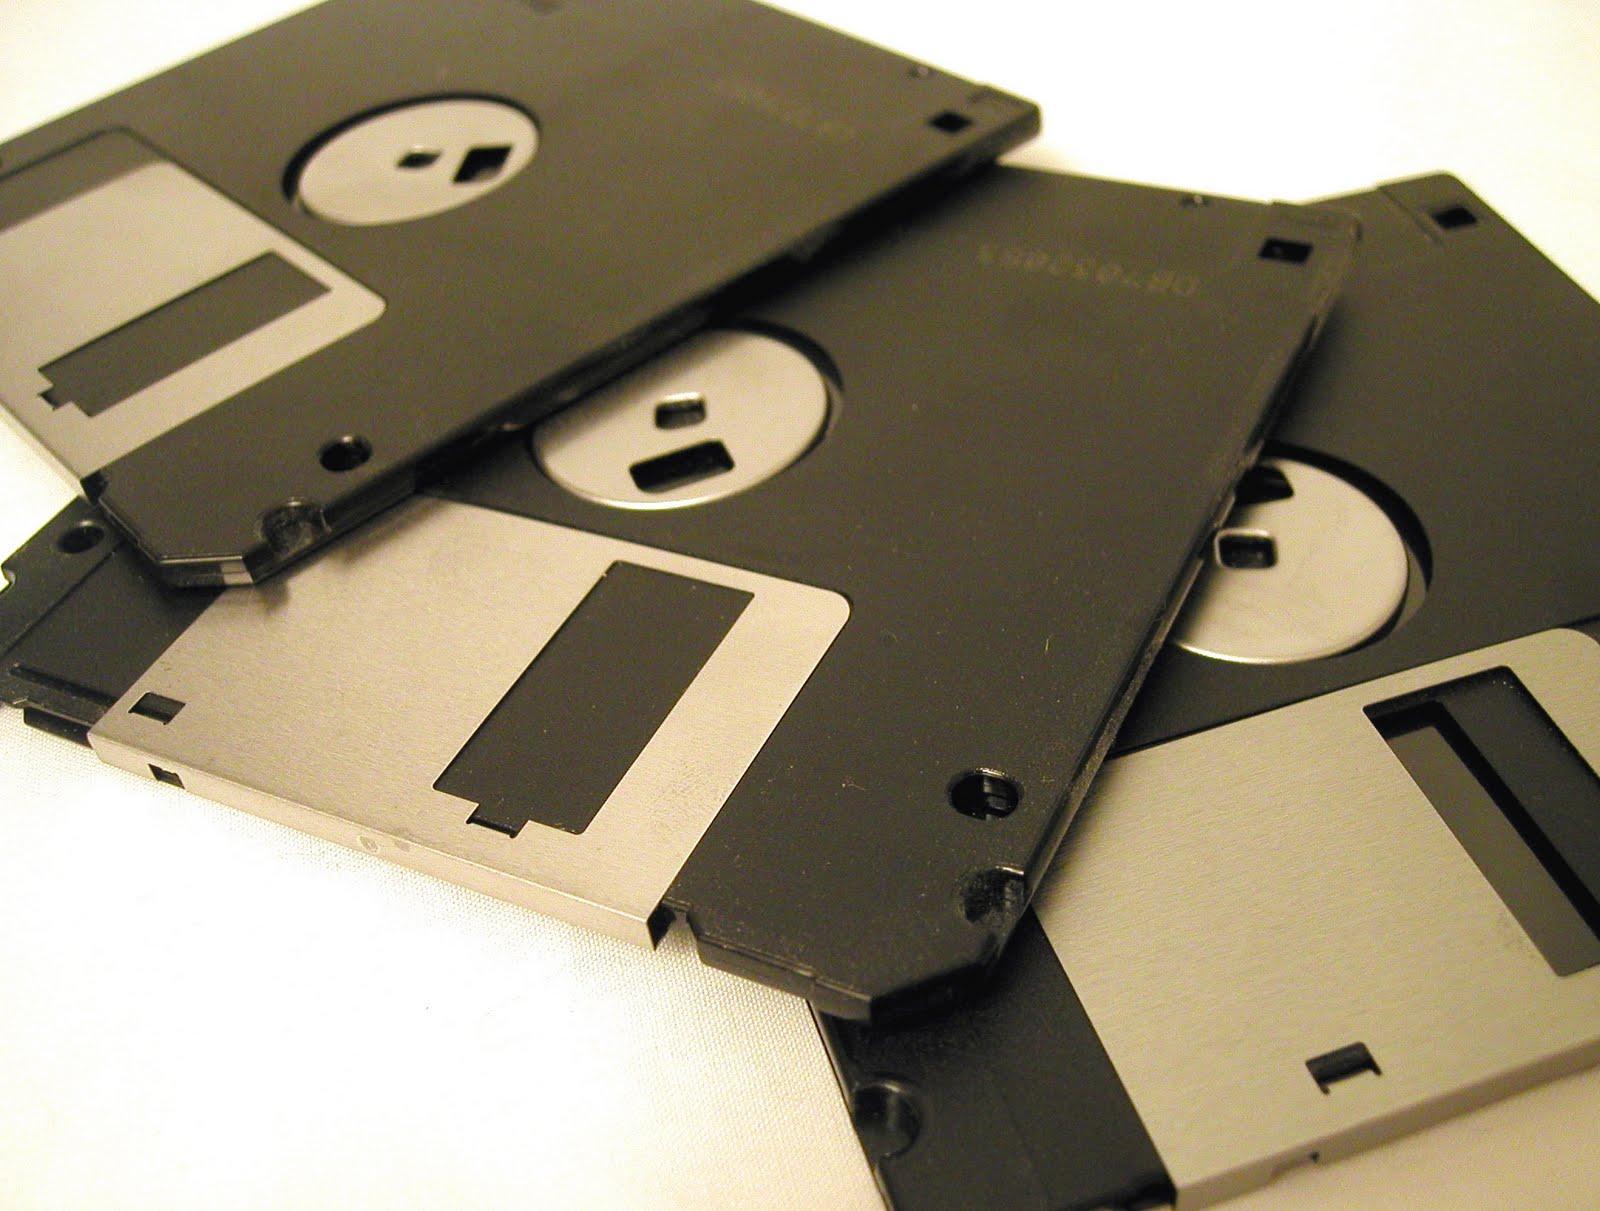 Windows 10 Preview Removes Floppy Disk Drive Support 468177 2 